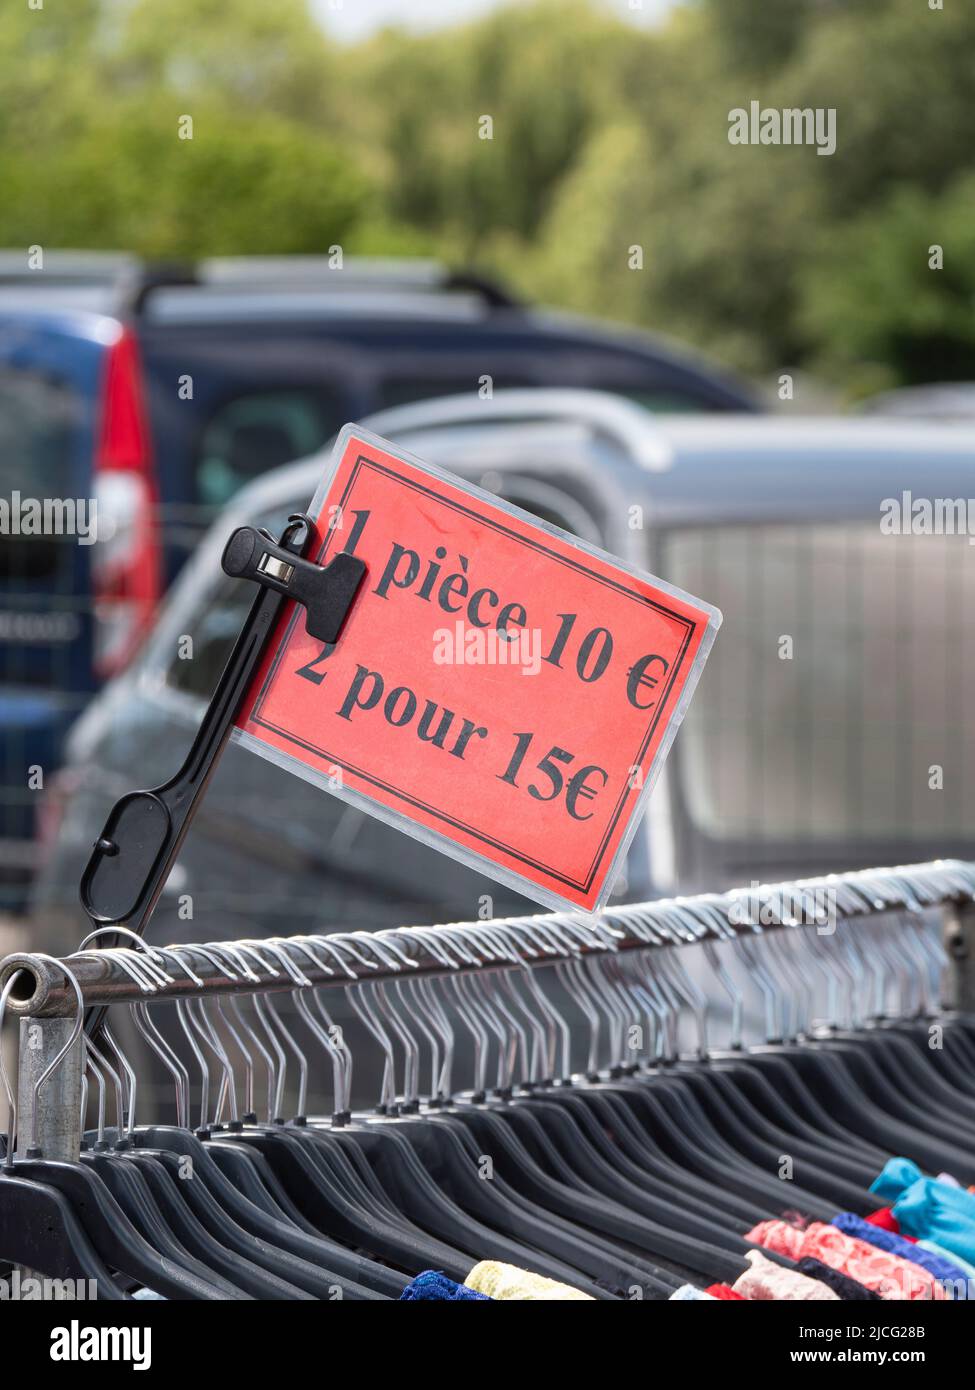 red price tag on a clothes rack at a market showing the price per piece, 1 piece 10 euros and in French it says 2 for 15 euros Stock Photo